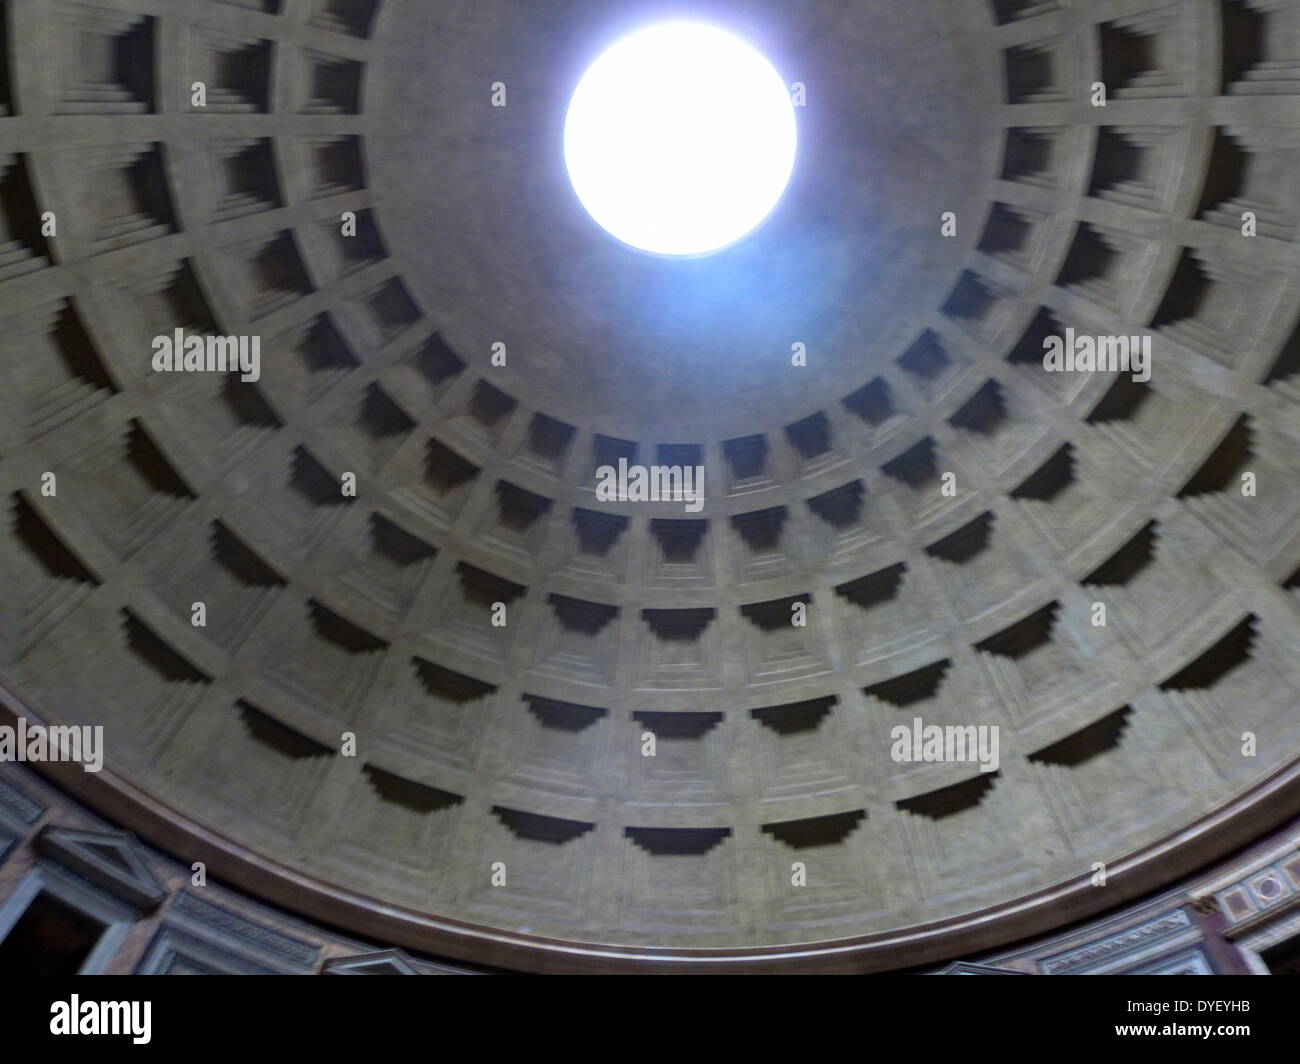 Internal detail from the Pantheon, Rome. Now a Catholic church, but was originally a temple to the ancient Gods of Rome. Commissioned by Marcus Agrippa and rebuilt by Emperor Hadrian in 126 AD. One of the best preserved Roman buildings. Stock Photo